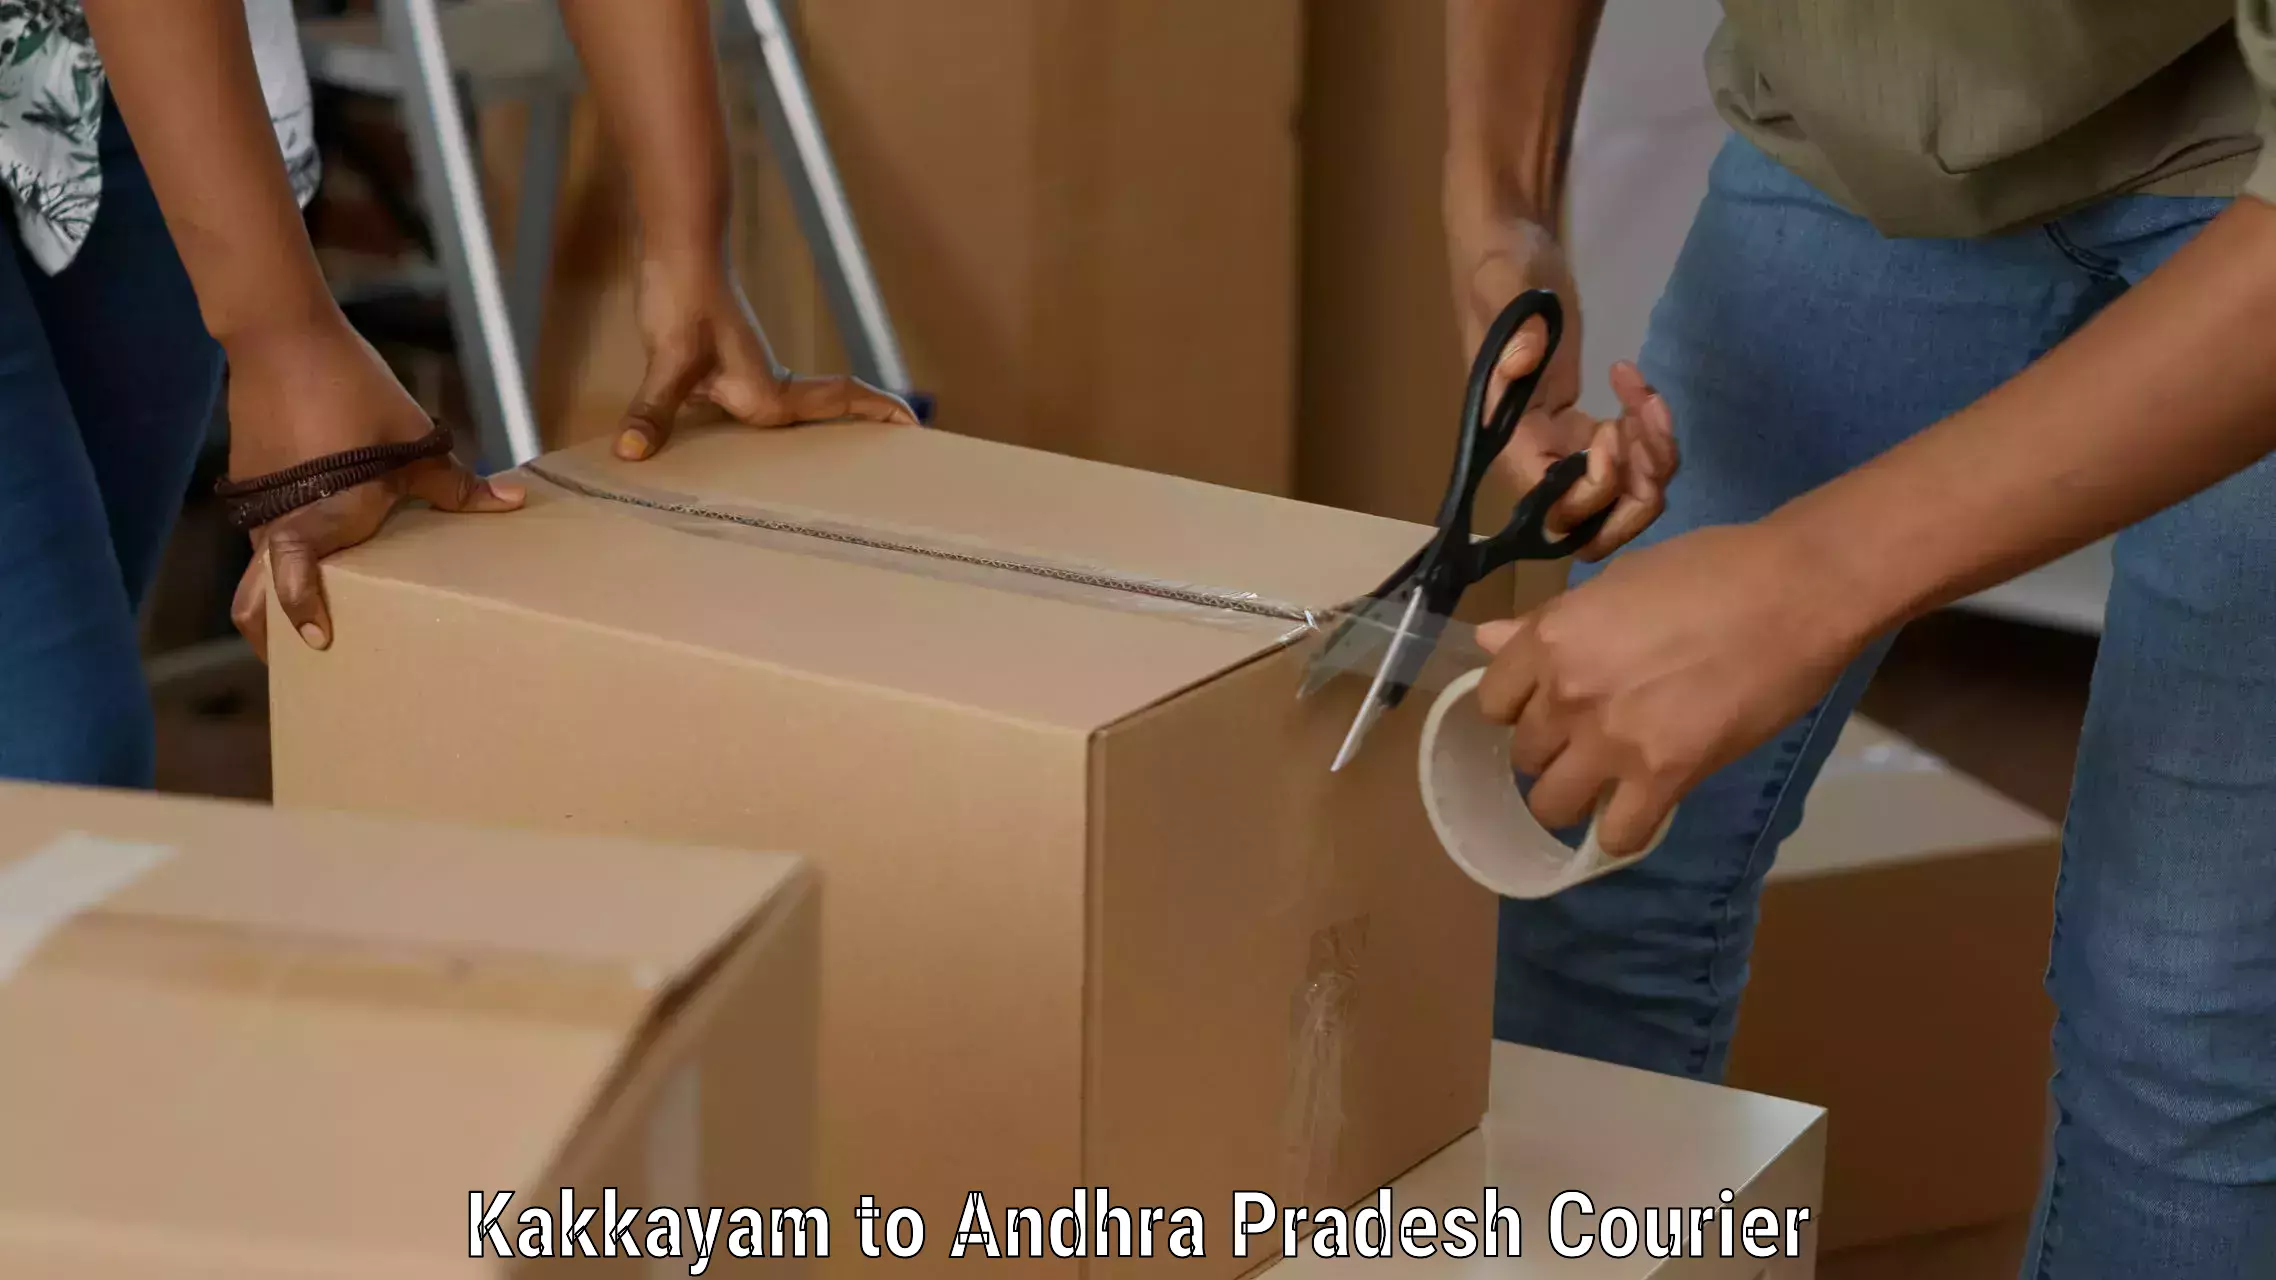 Easy access courier services Kakkayam to Chittoor